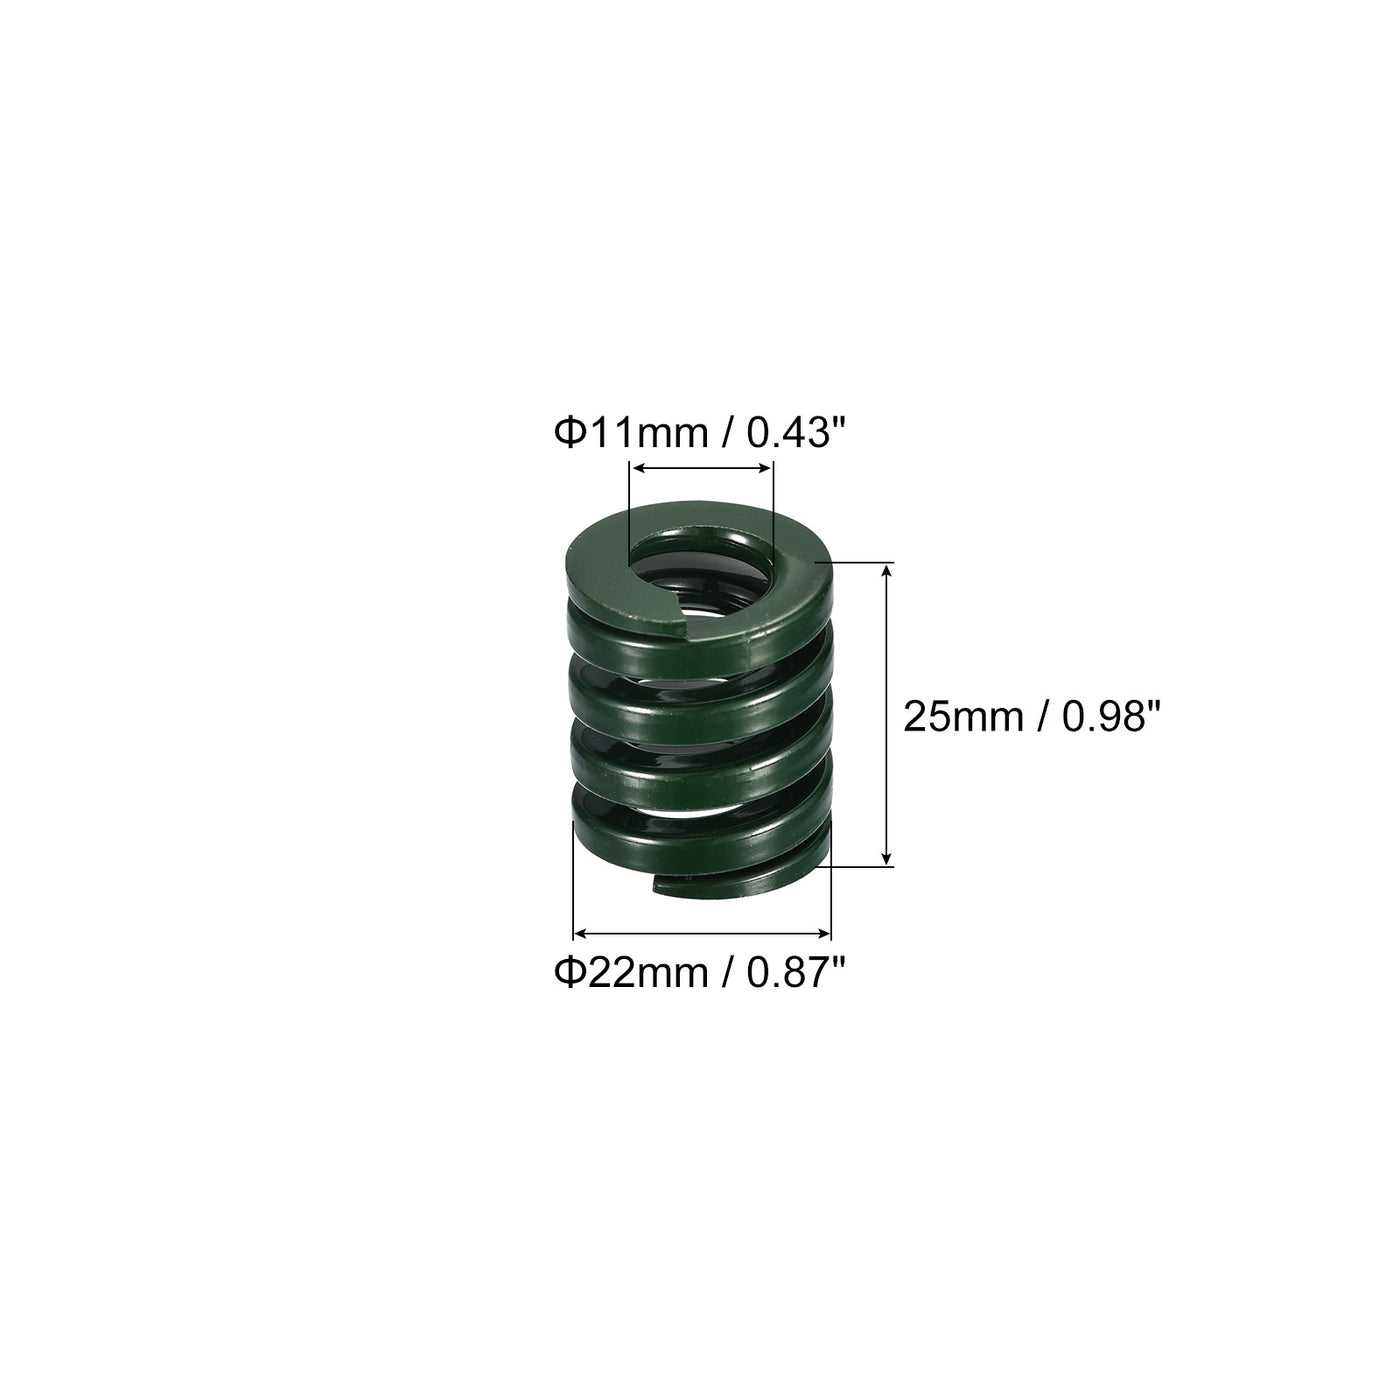 uxcell Uxcell 3D Printer Die Spring, 1pcs 22mm OD 25mm Long Spiral Stamping Compression Green